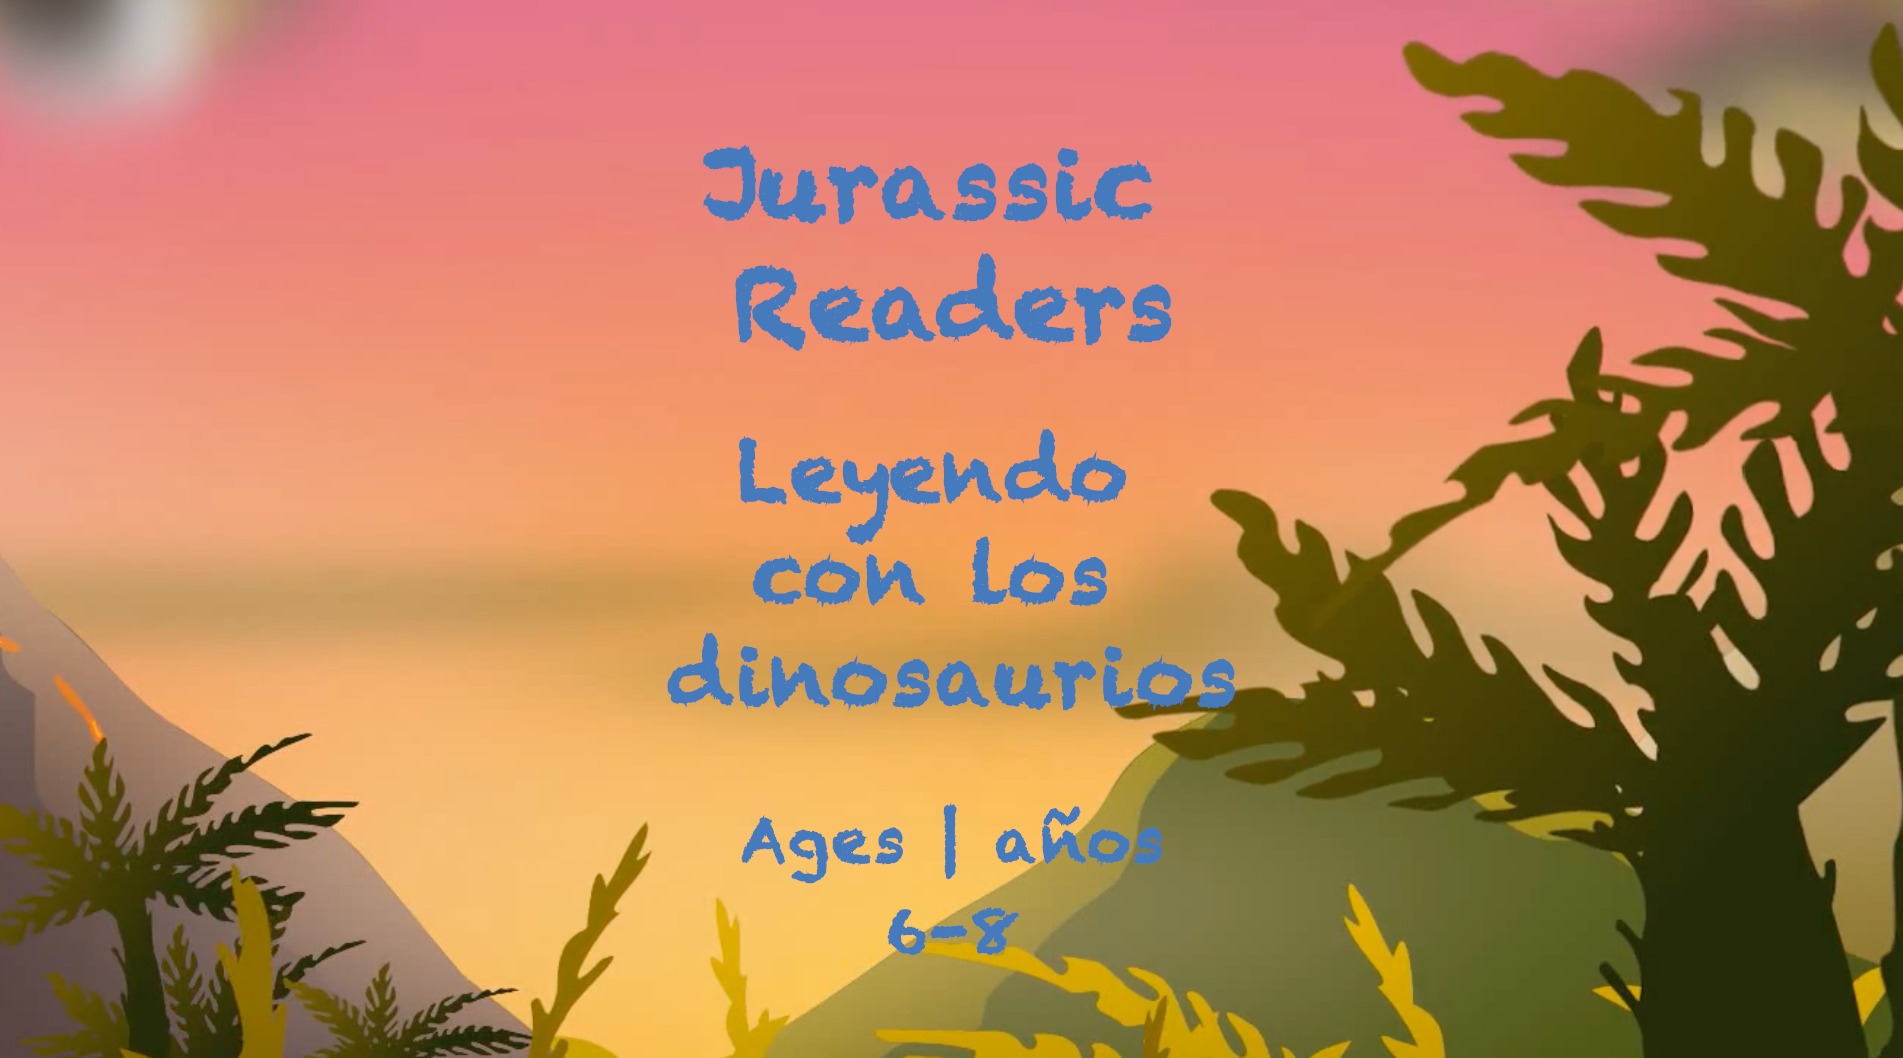 Jurassic Readers for 6-8 year olds